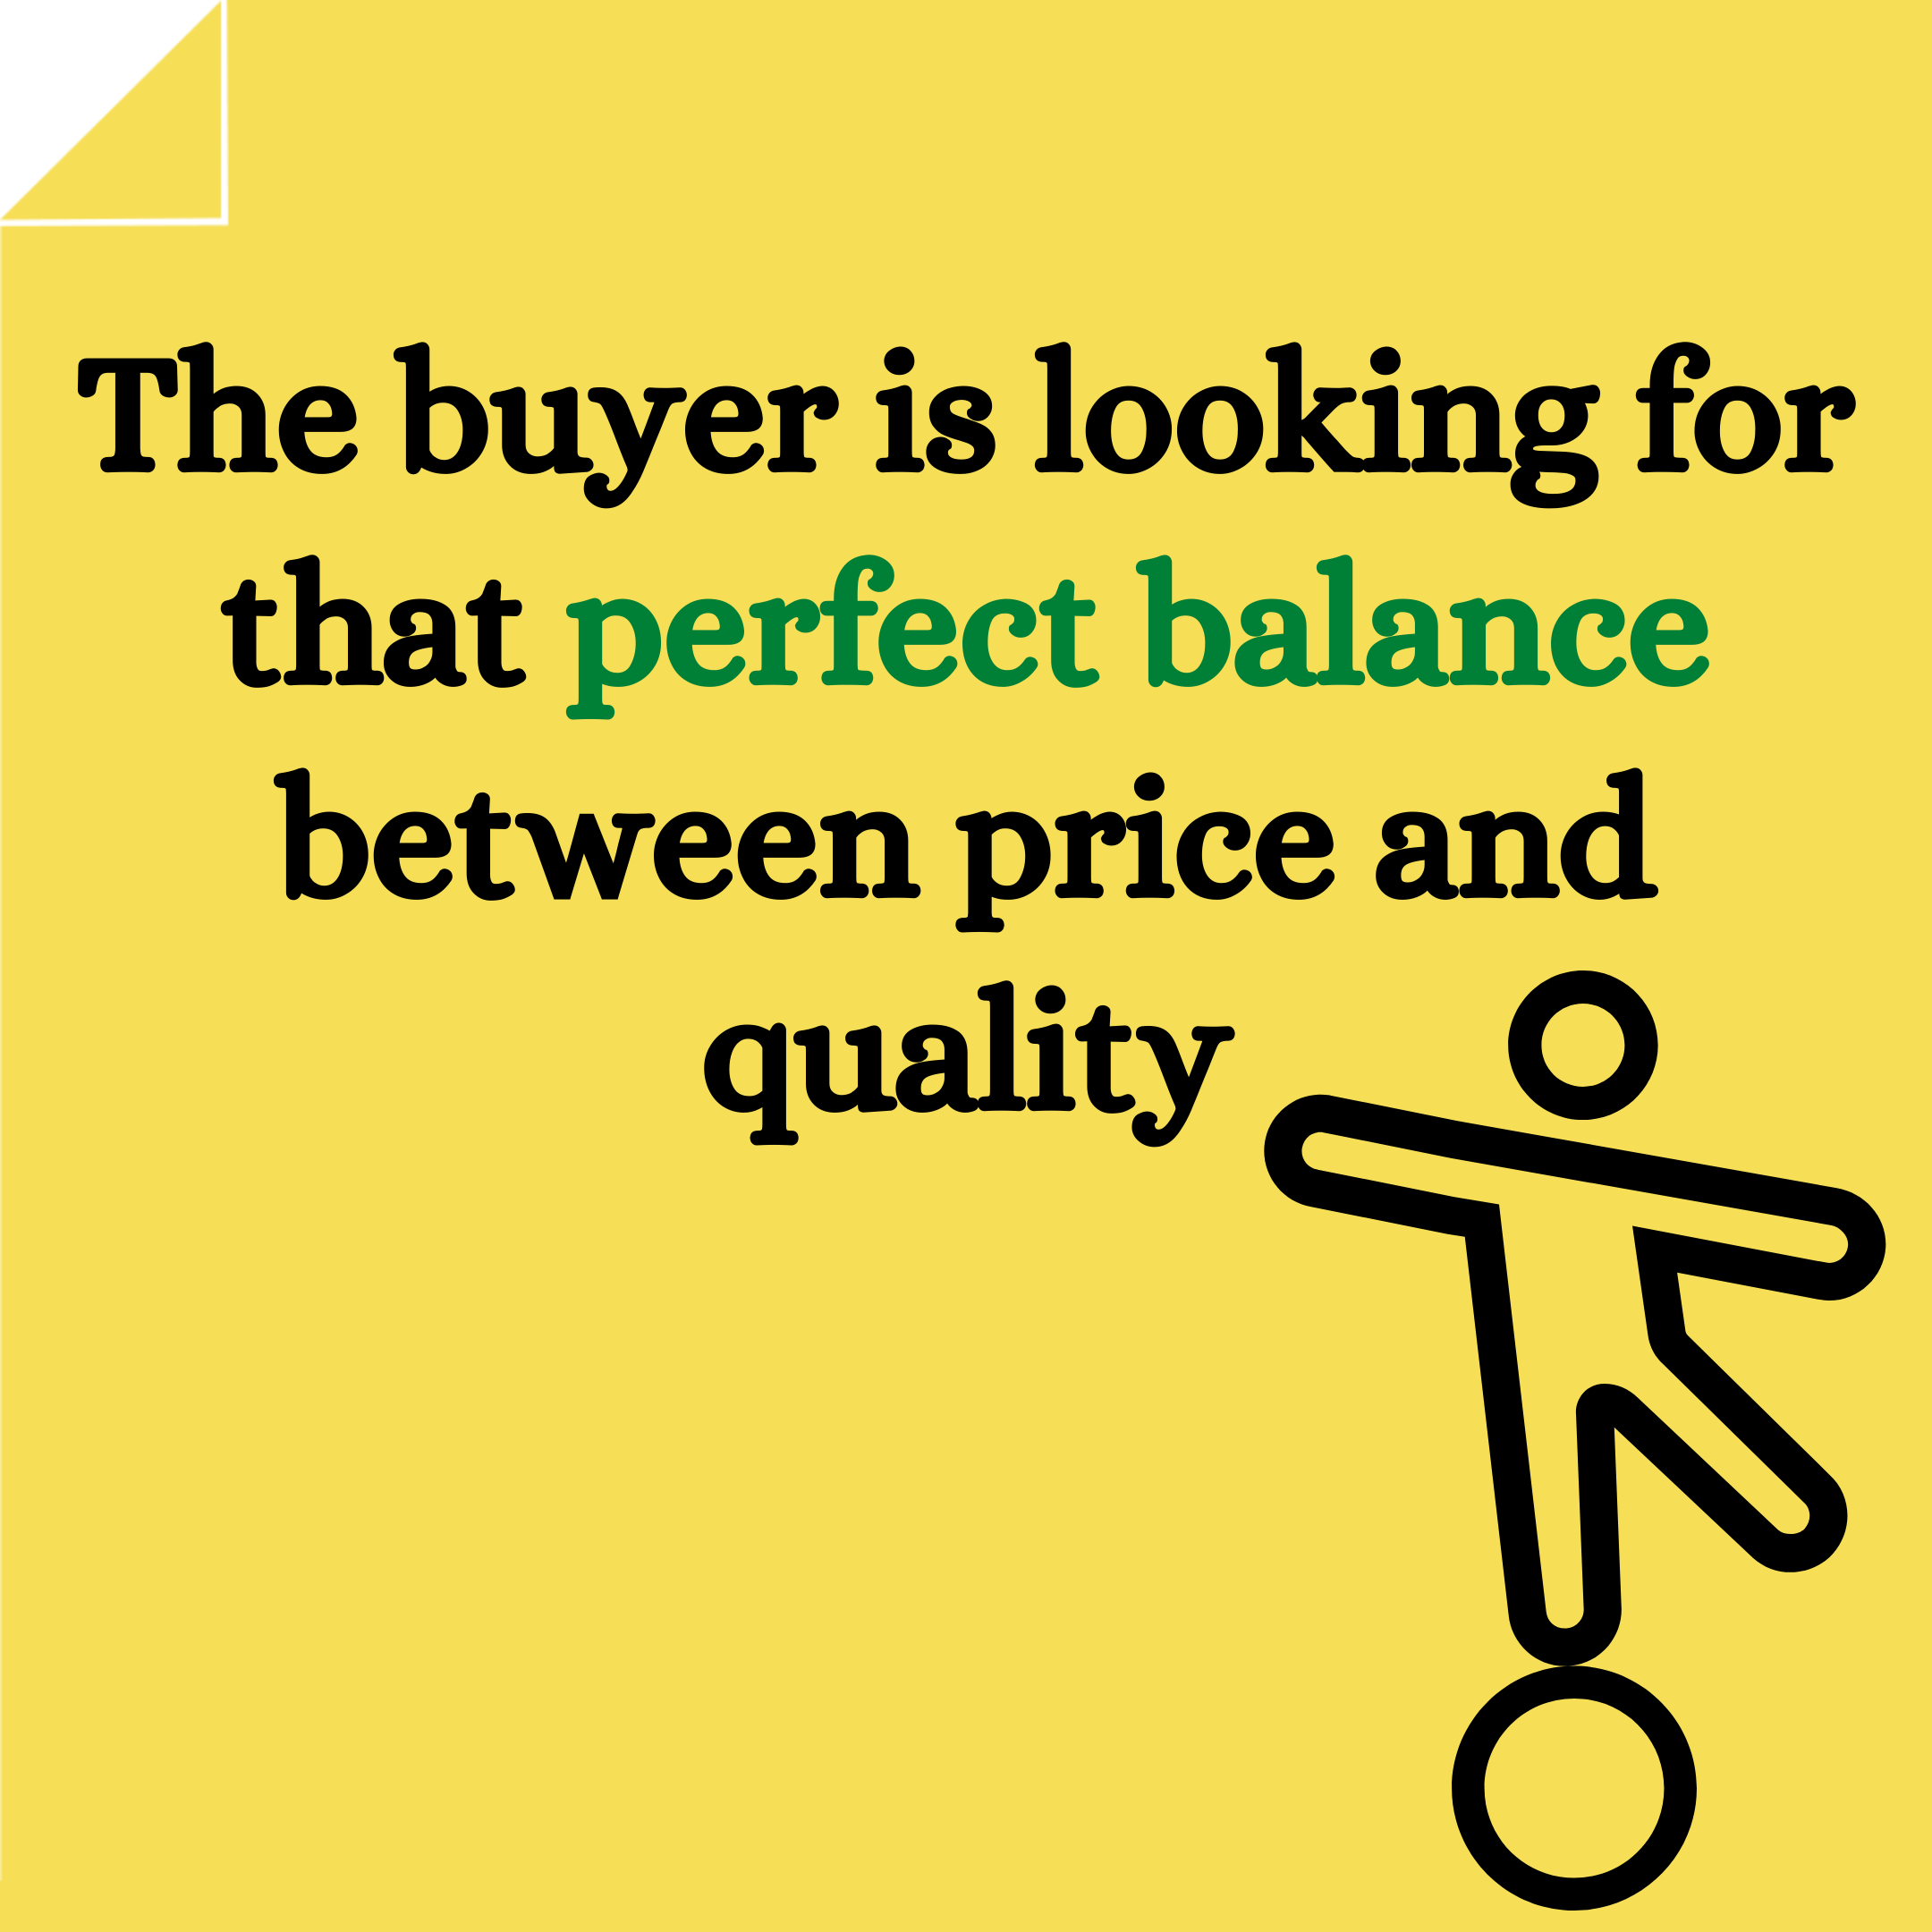 Price justification balance between price and quality.